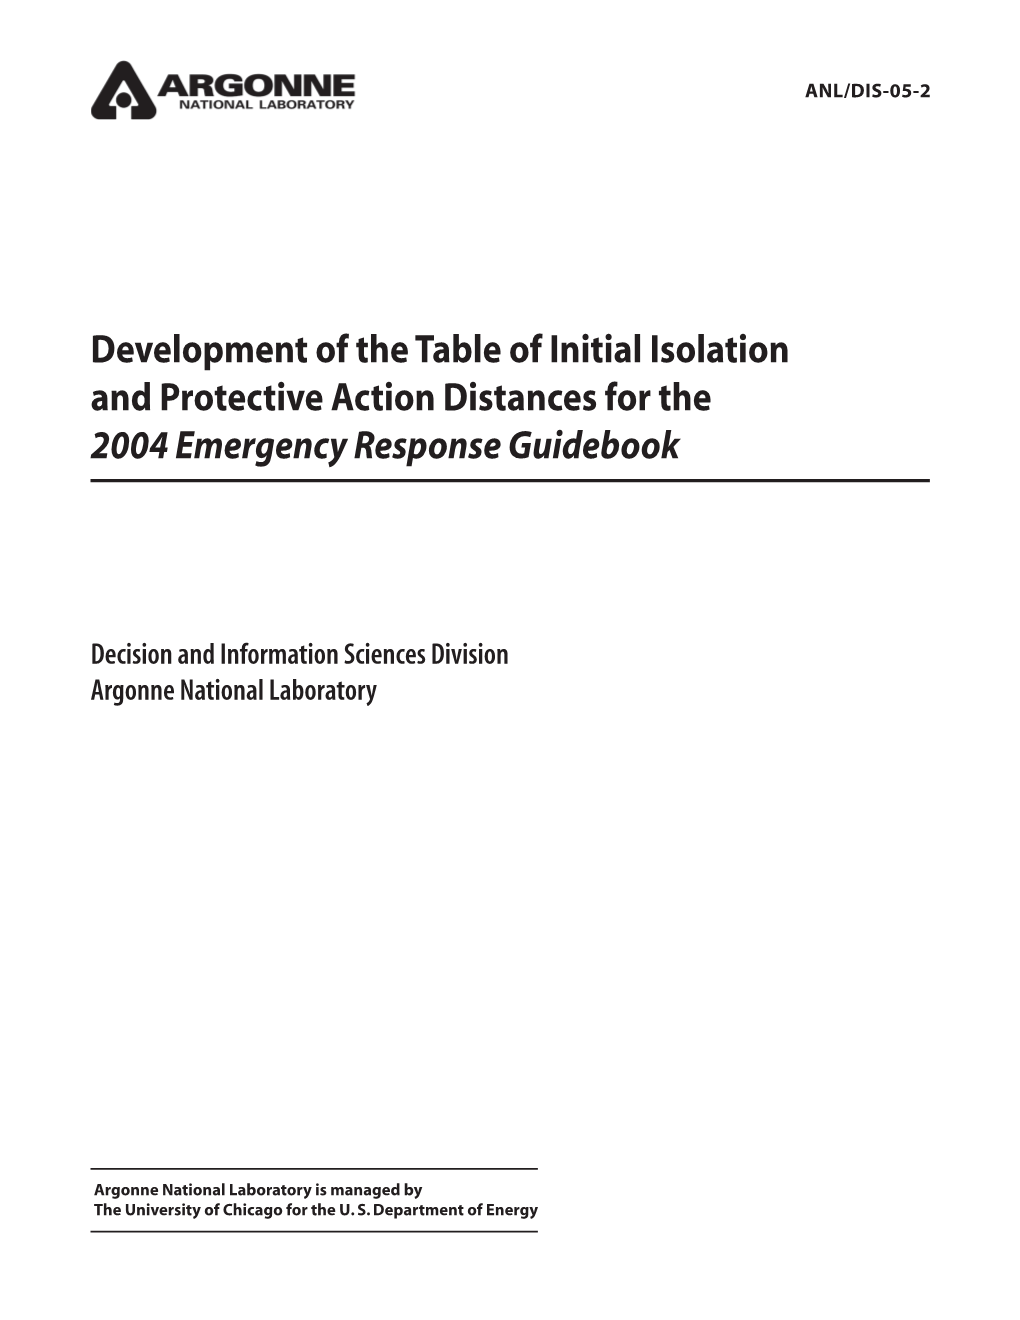 Development of the Table of Initial Isolation and Protective Action Distances for the 2004 Emergency Response Guidebook